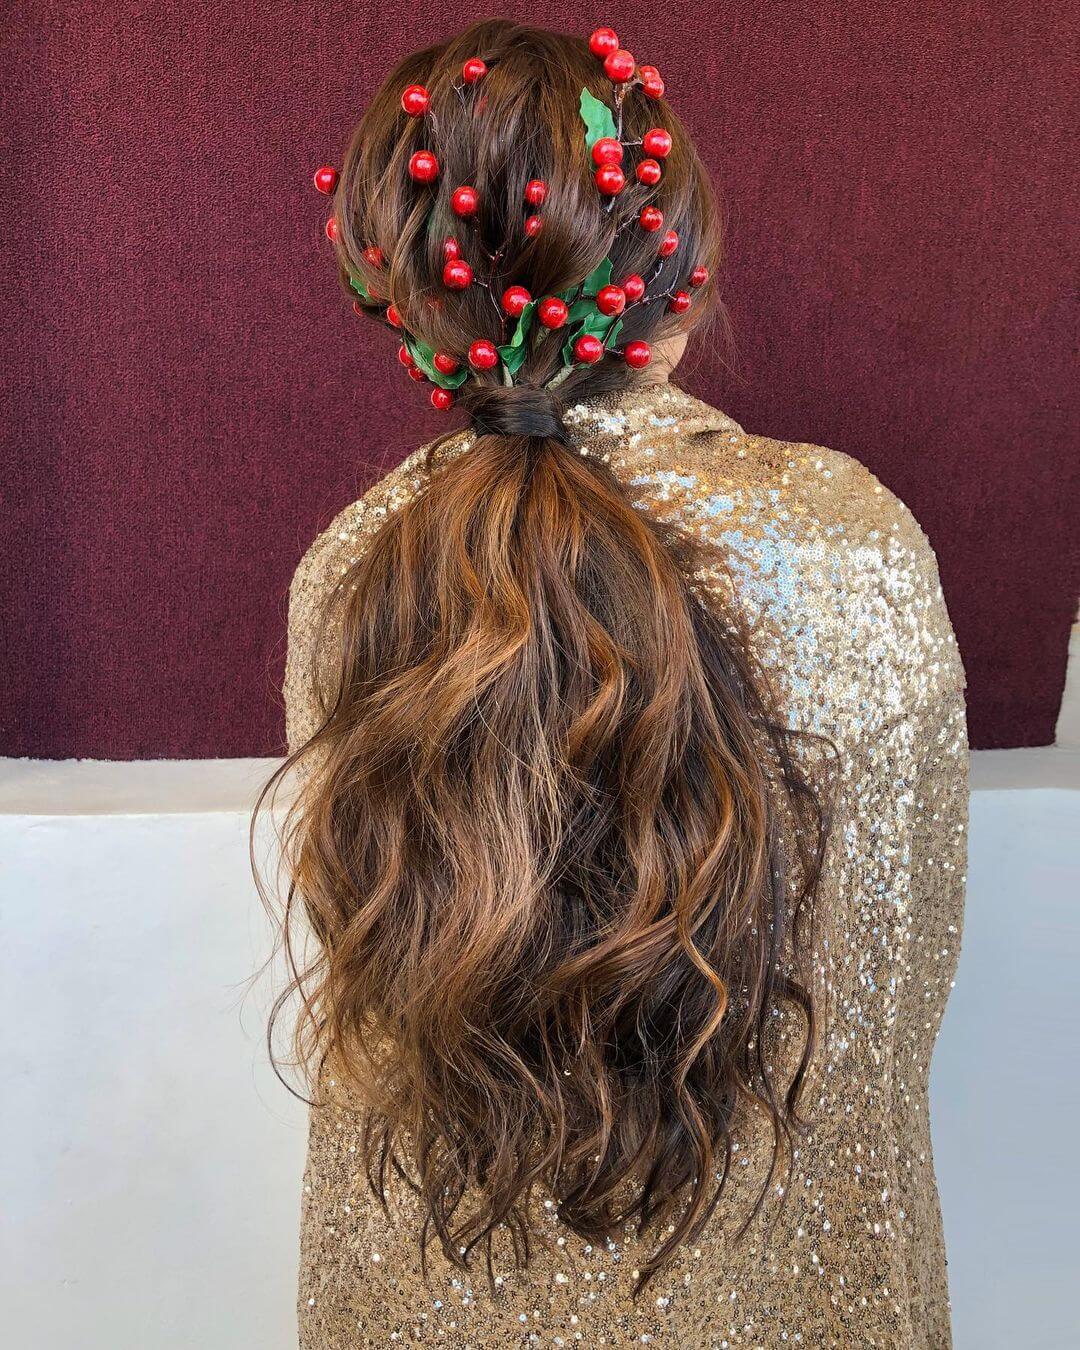 Christmas Hairstyles For Girls Low Pony For Christmas With Spreading Cherry Bunch